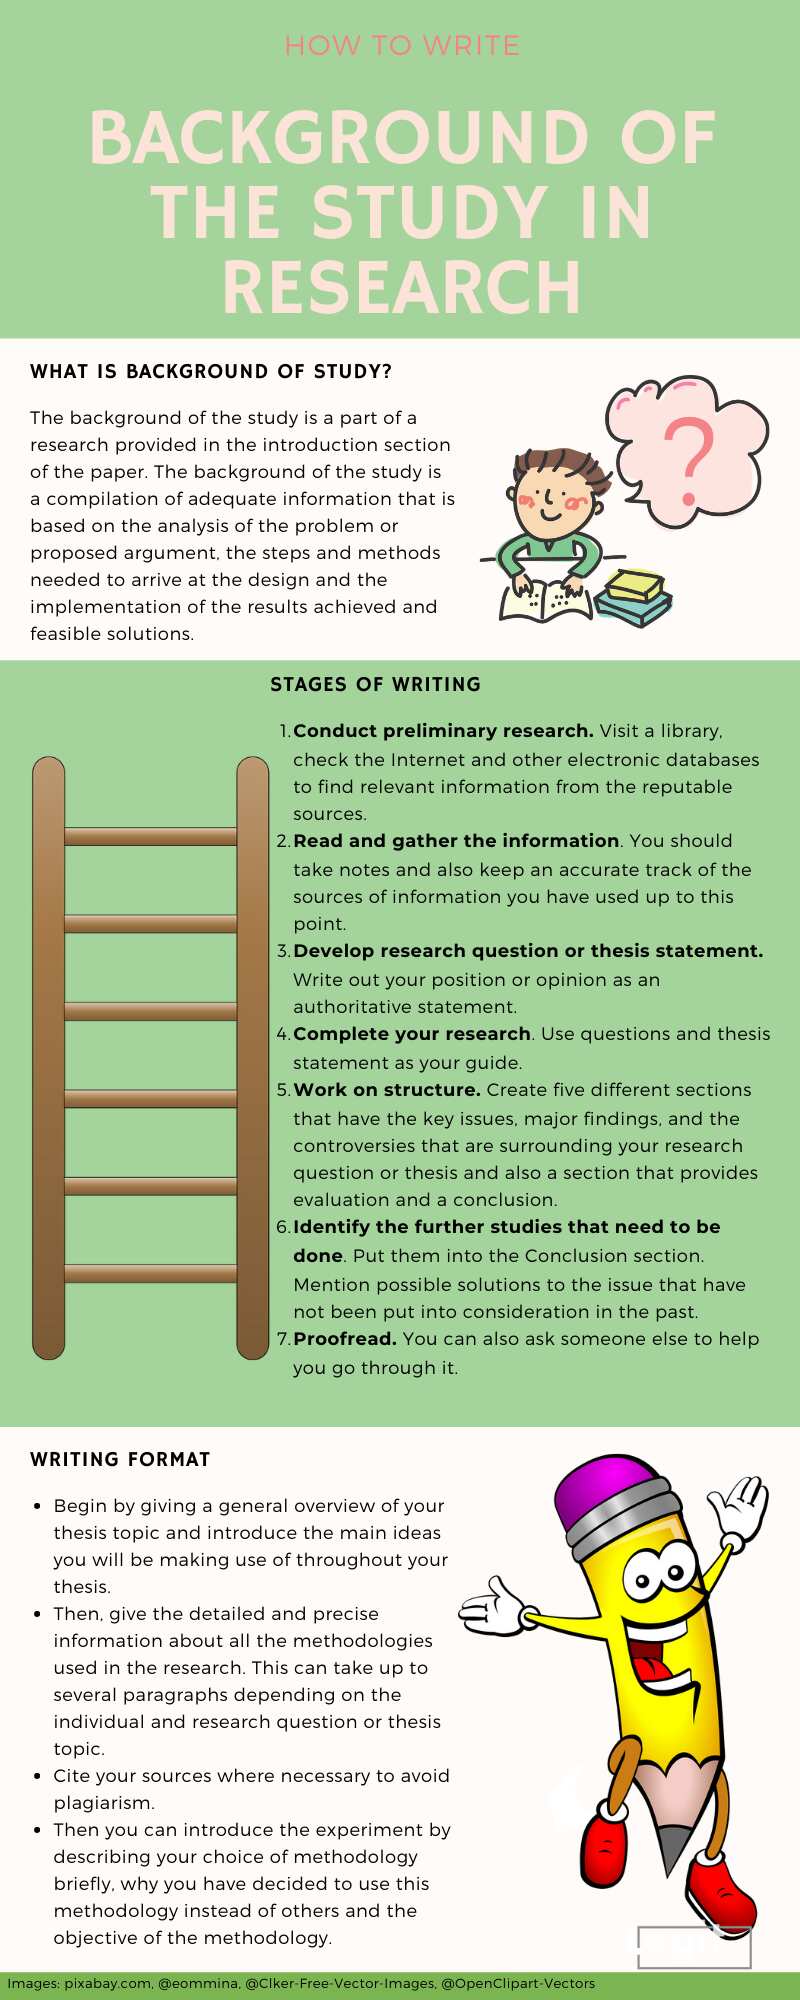 Background of the study in research: guide on how to write one 